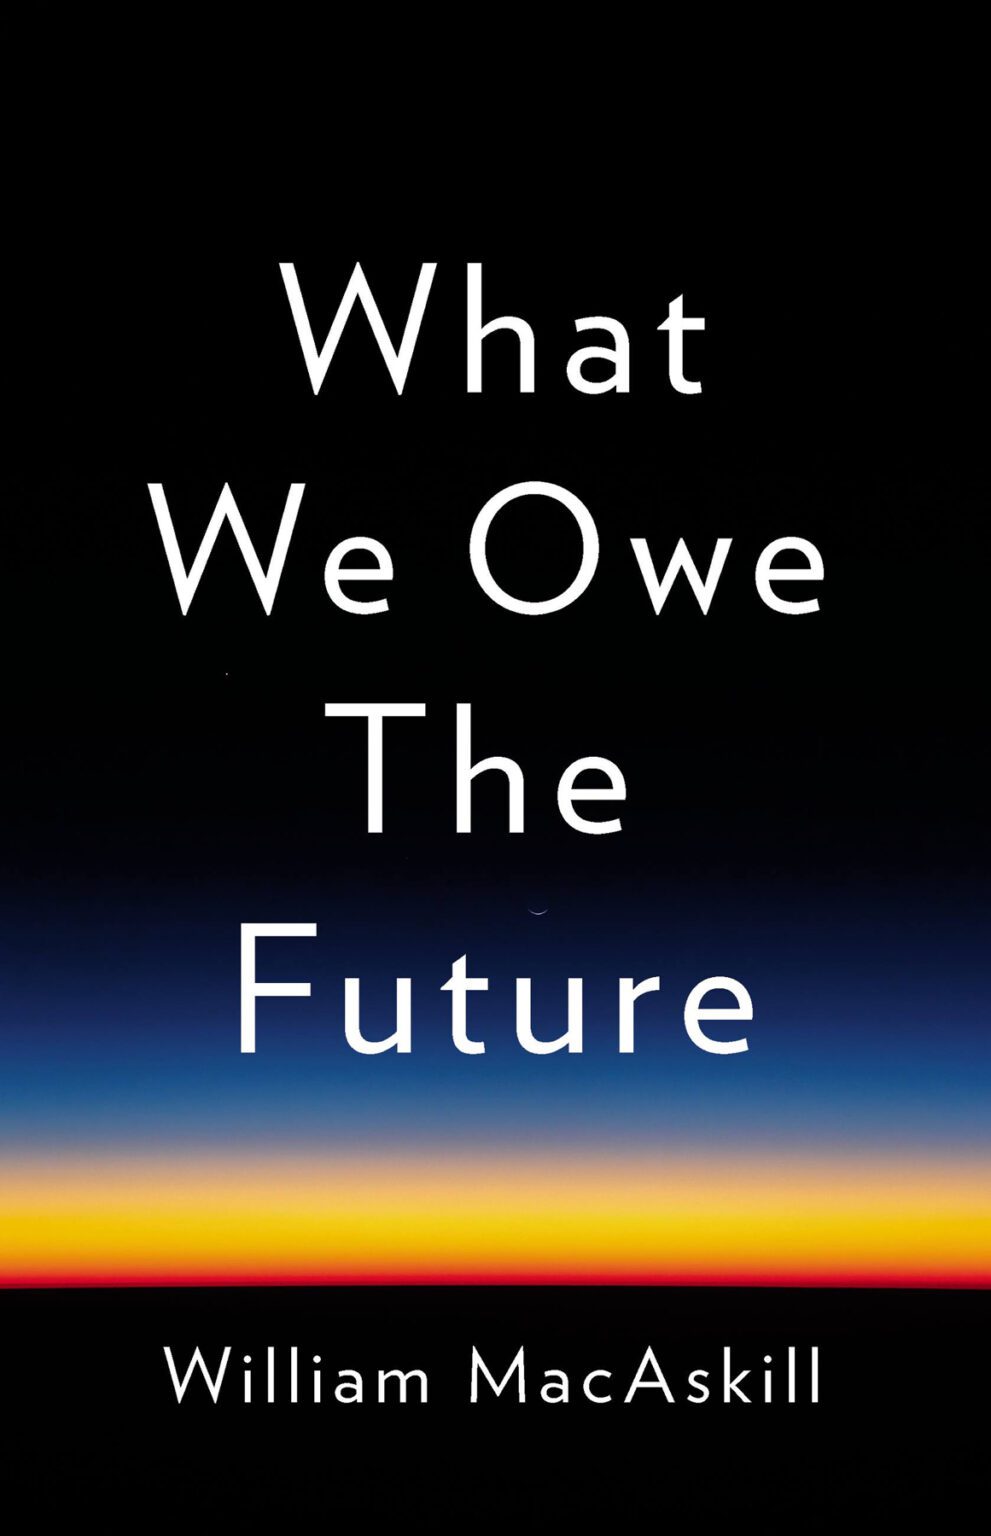 Book cover of "What We Owe the Future" by William MacAskill